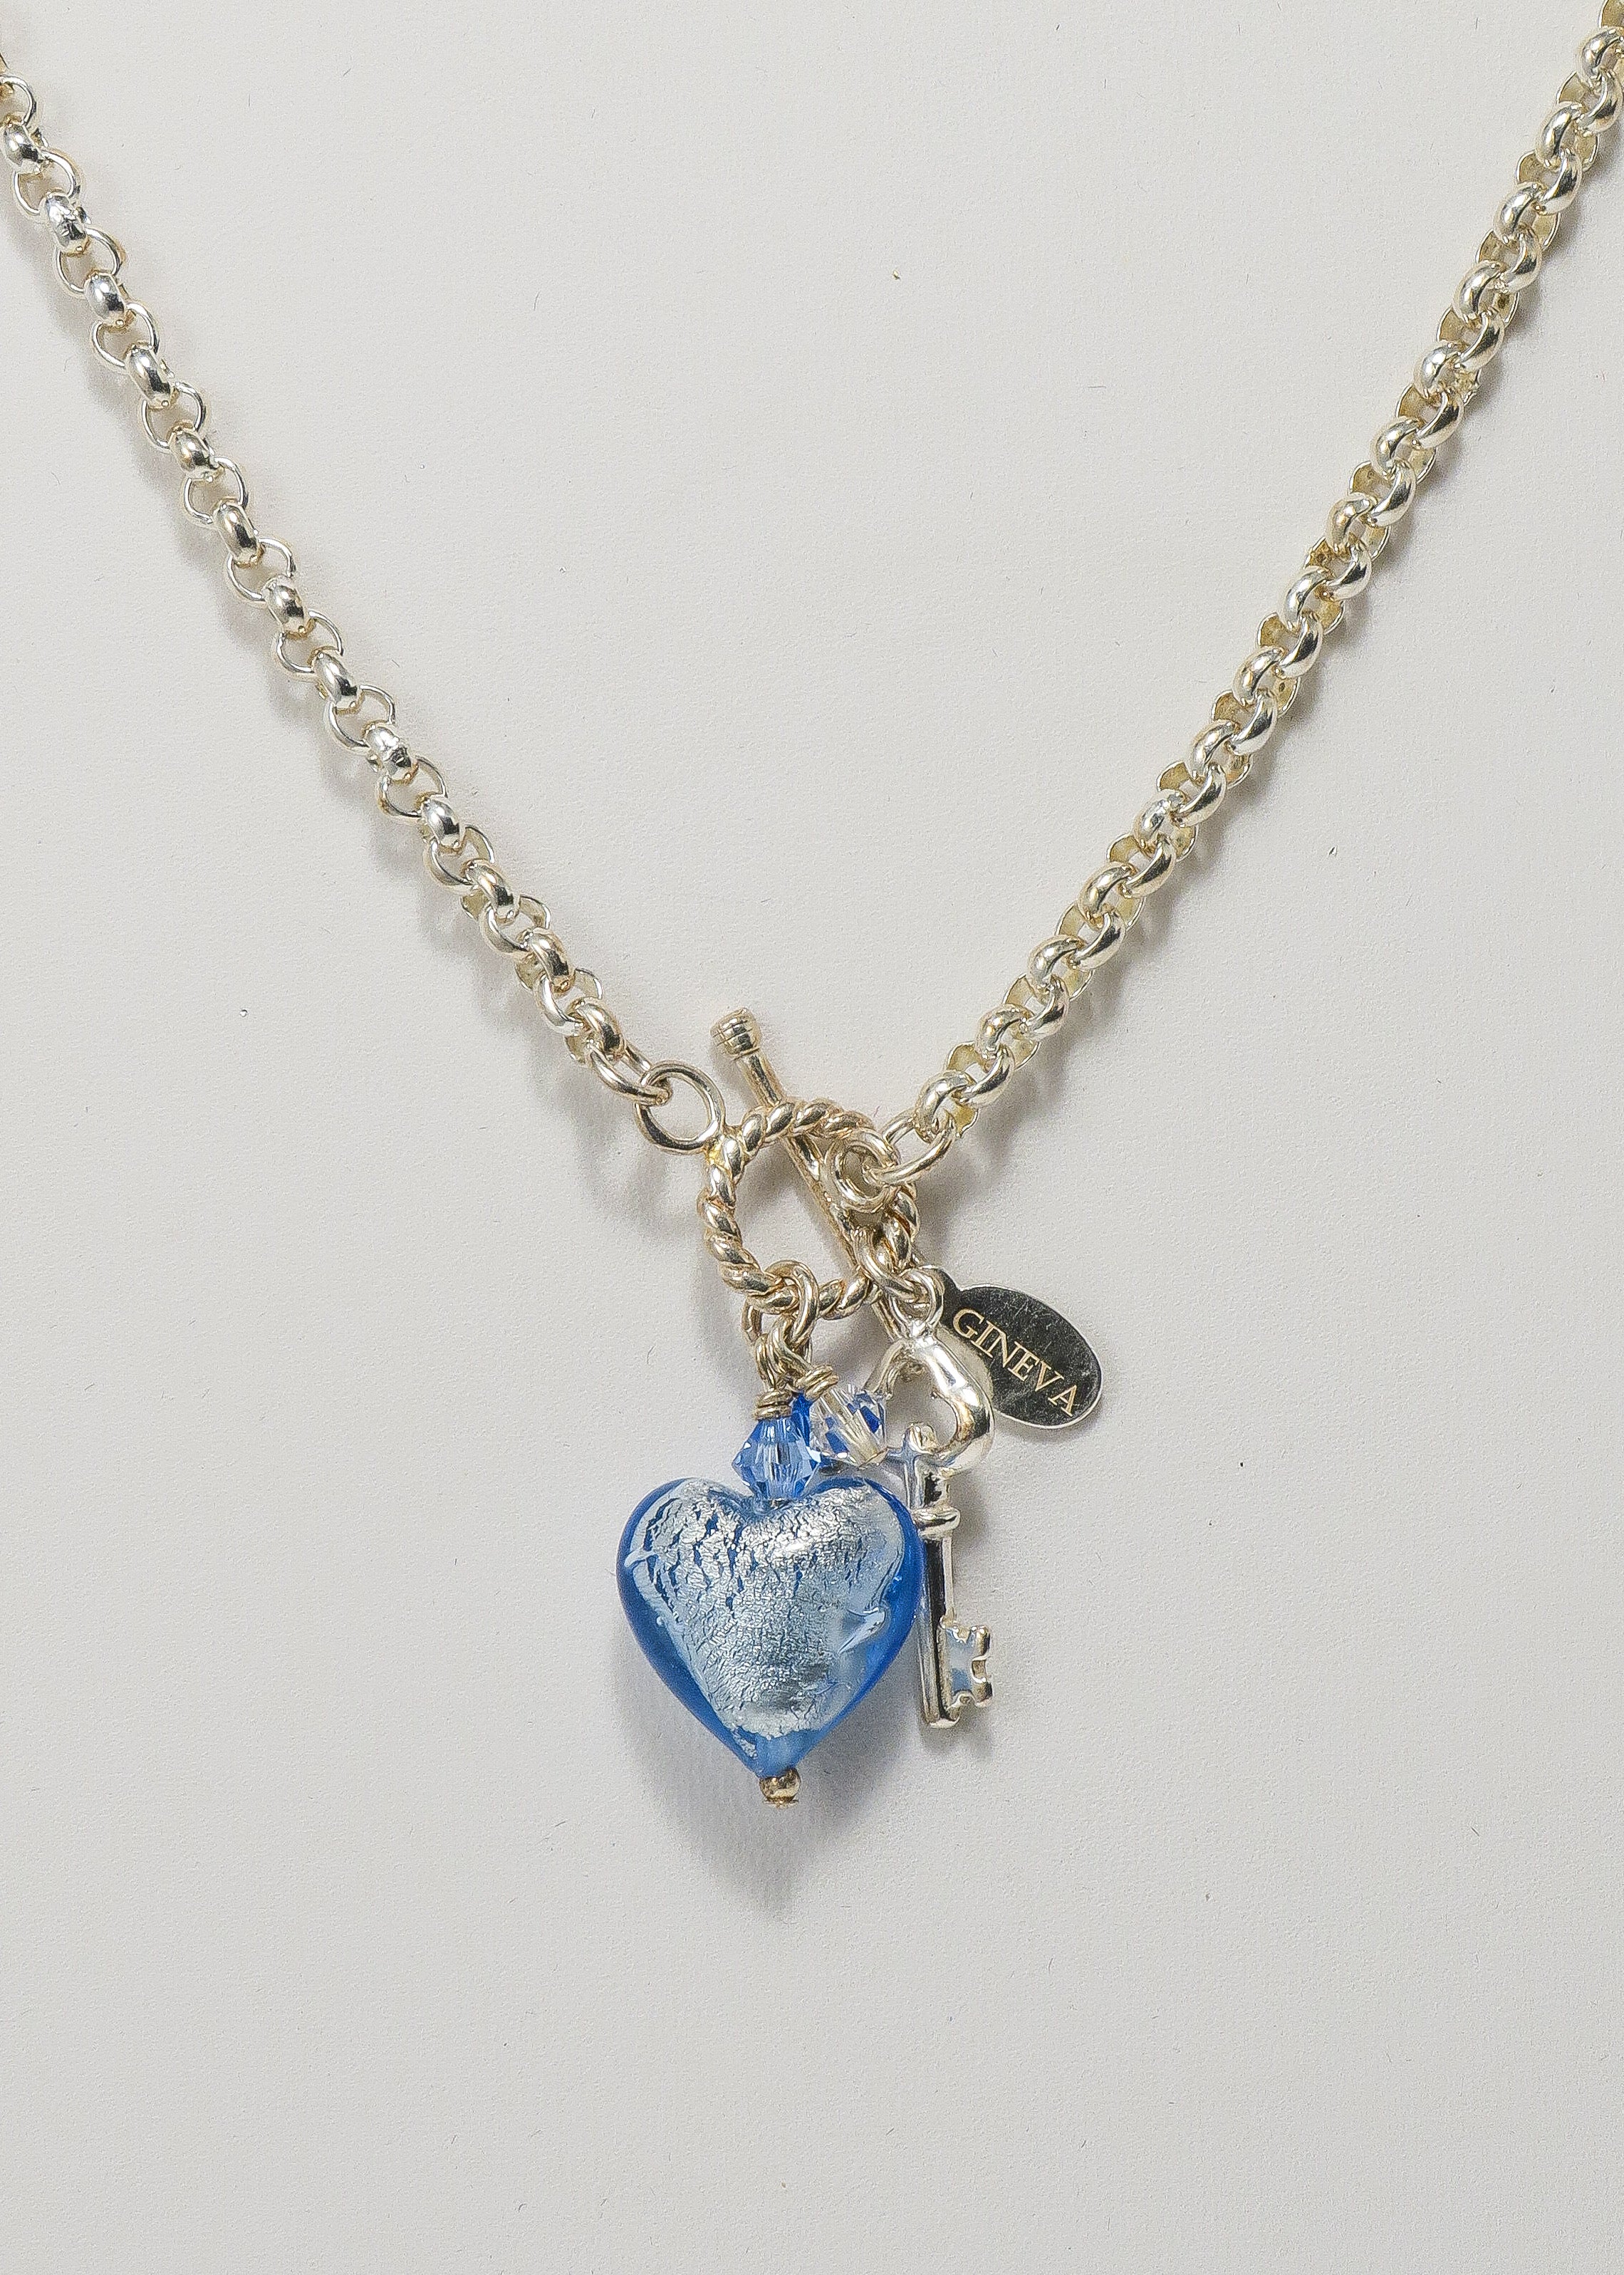 SALE*Personalized Key to my heart Set of 2 Necklace and Keychain for H|  Payton Leigh Treasures